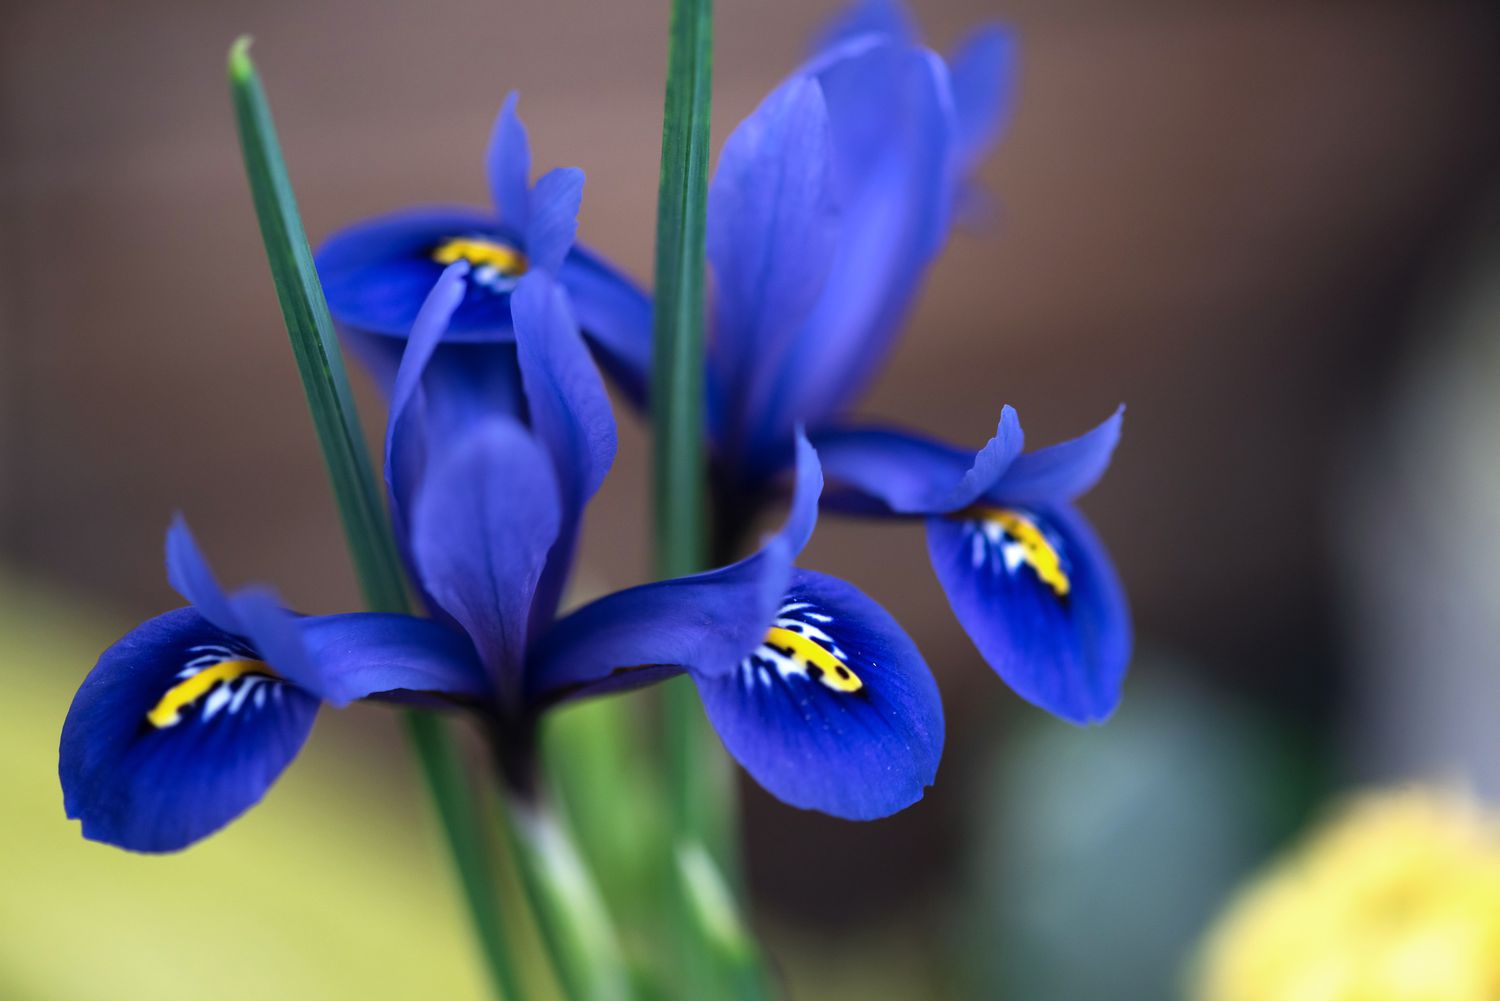 Iris reticulata plant with royal blue and yellow flowers with leaf tips closeup